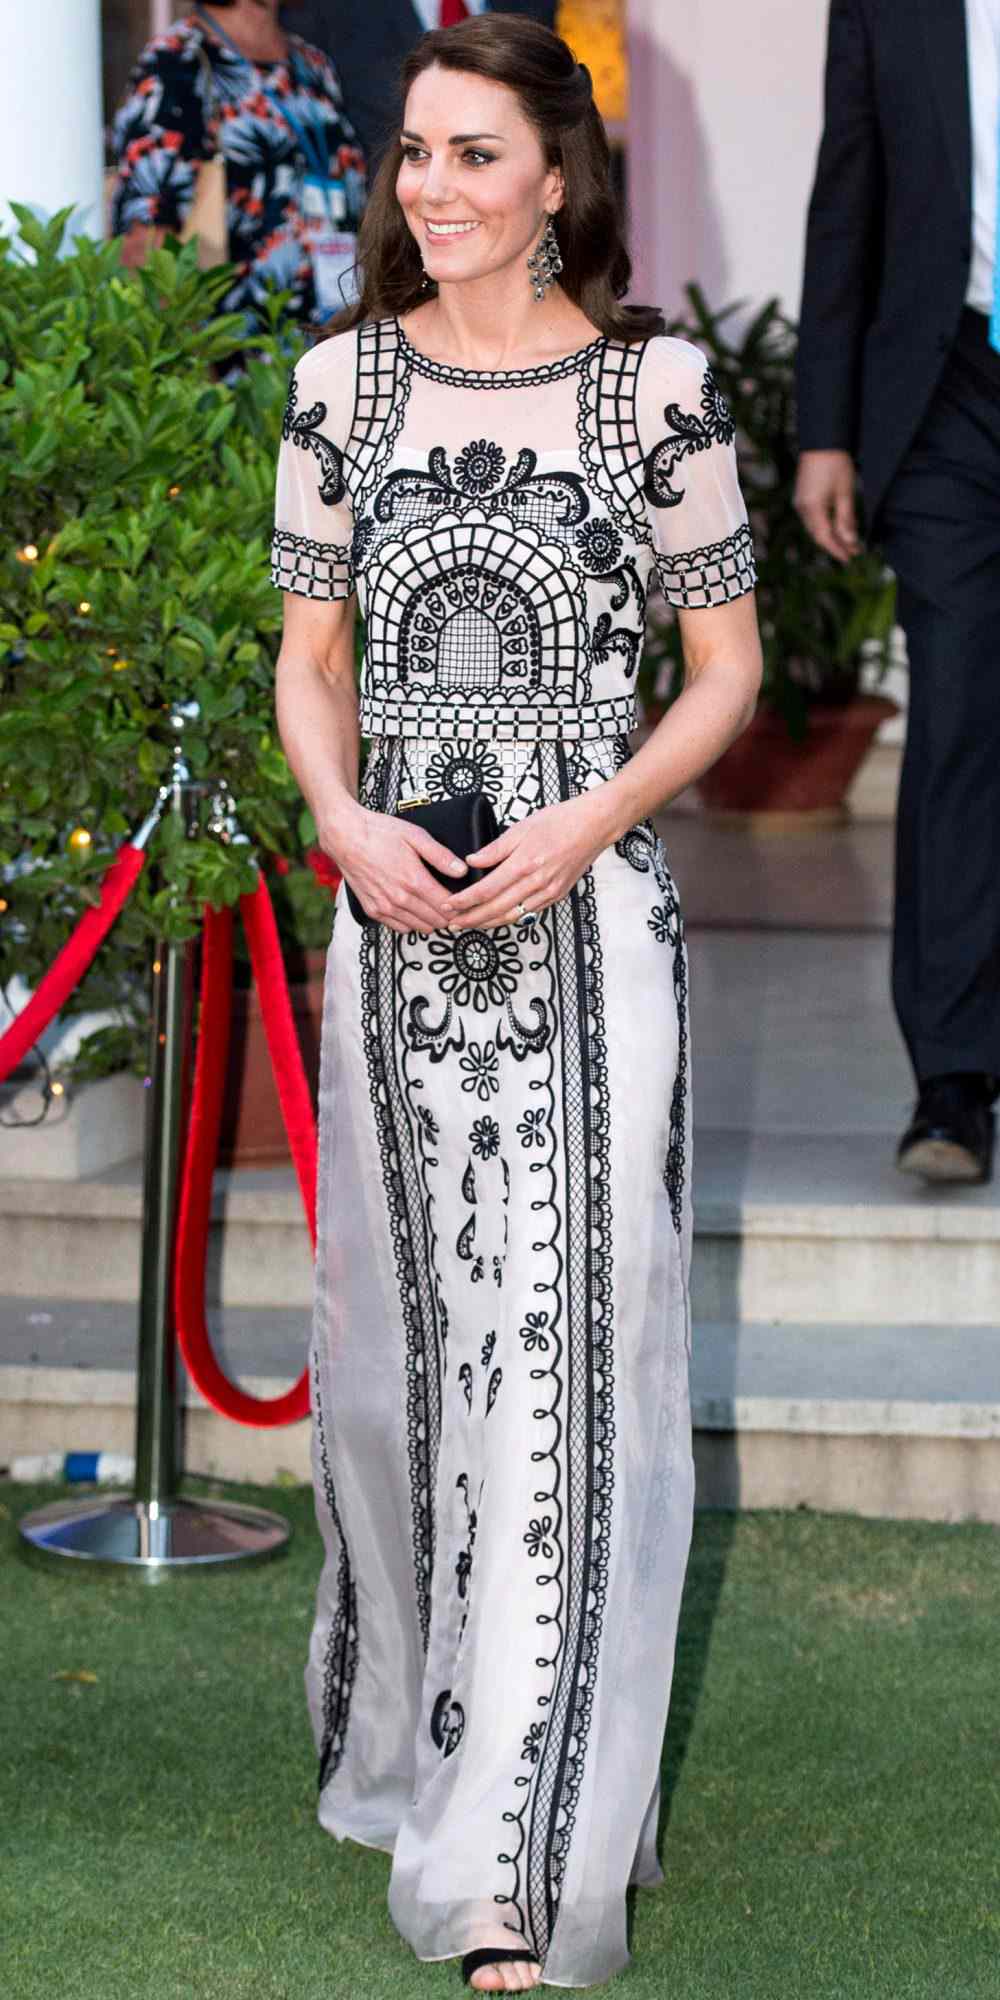 Kate Middleton in a black and white Temperley London dress